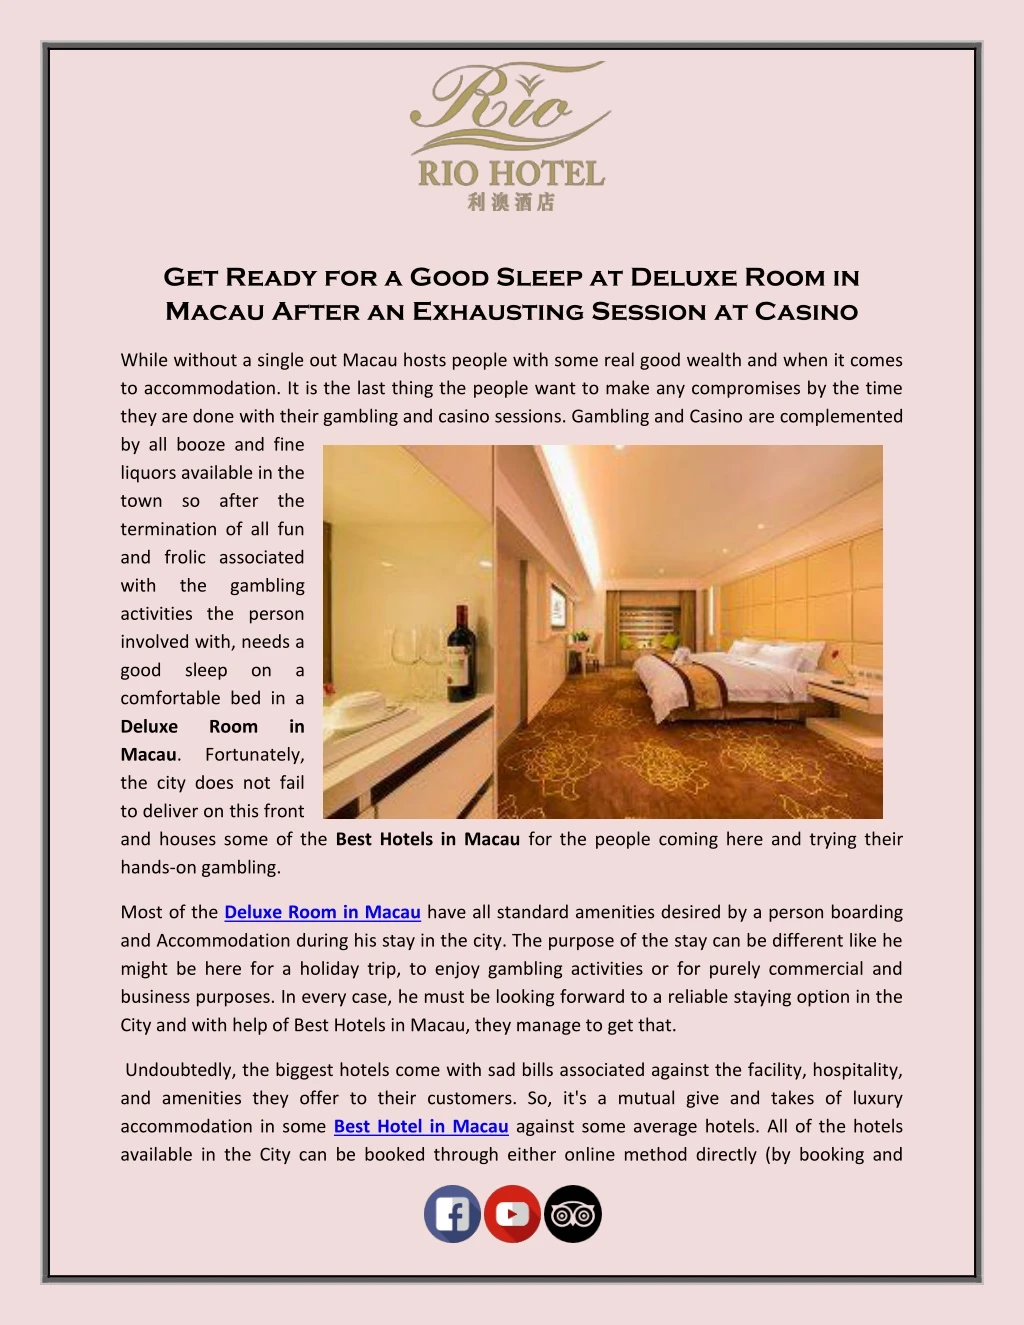 get ready for a good sleep at deluxe room